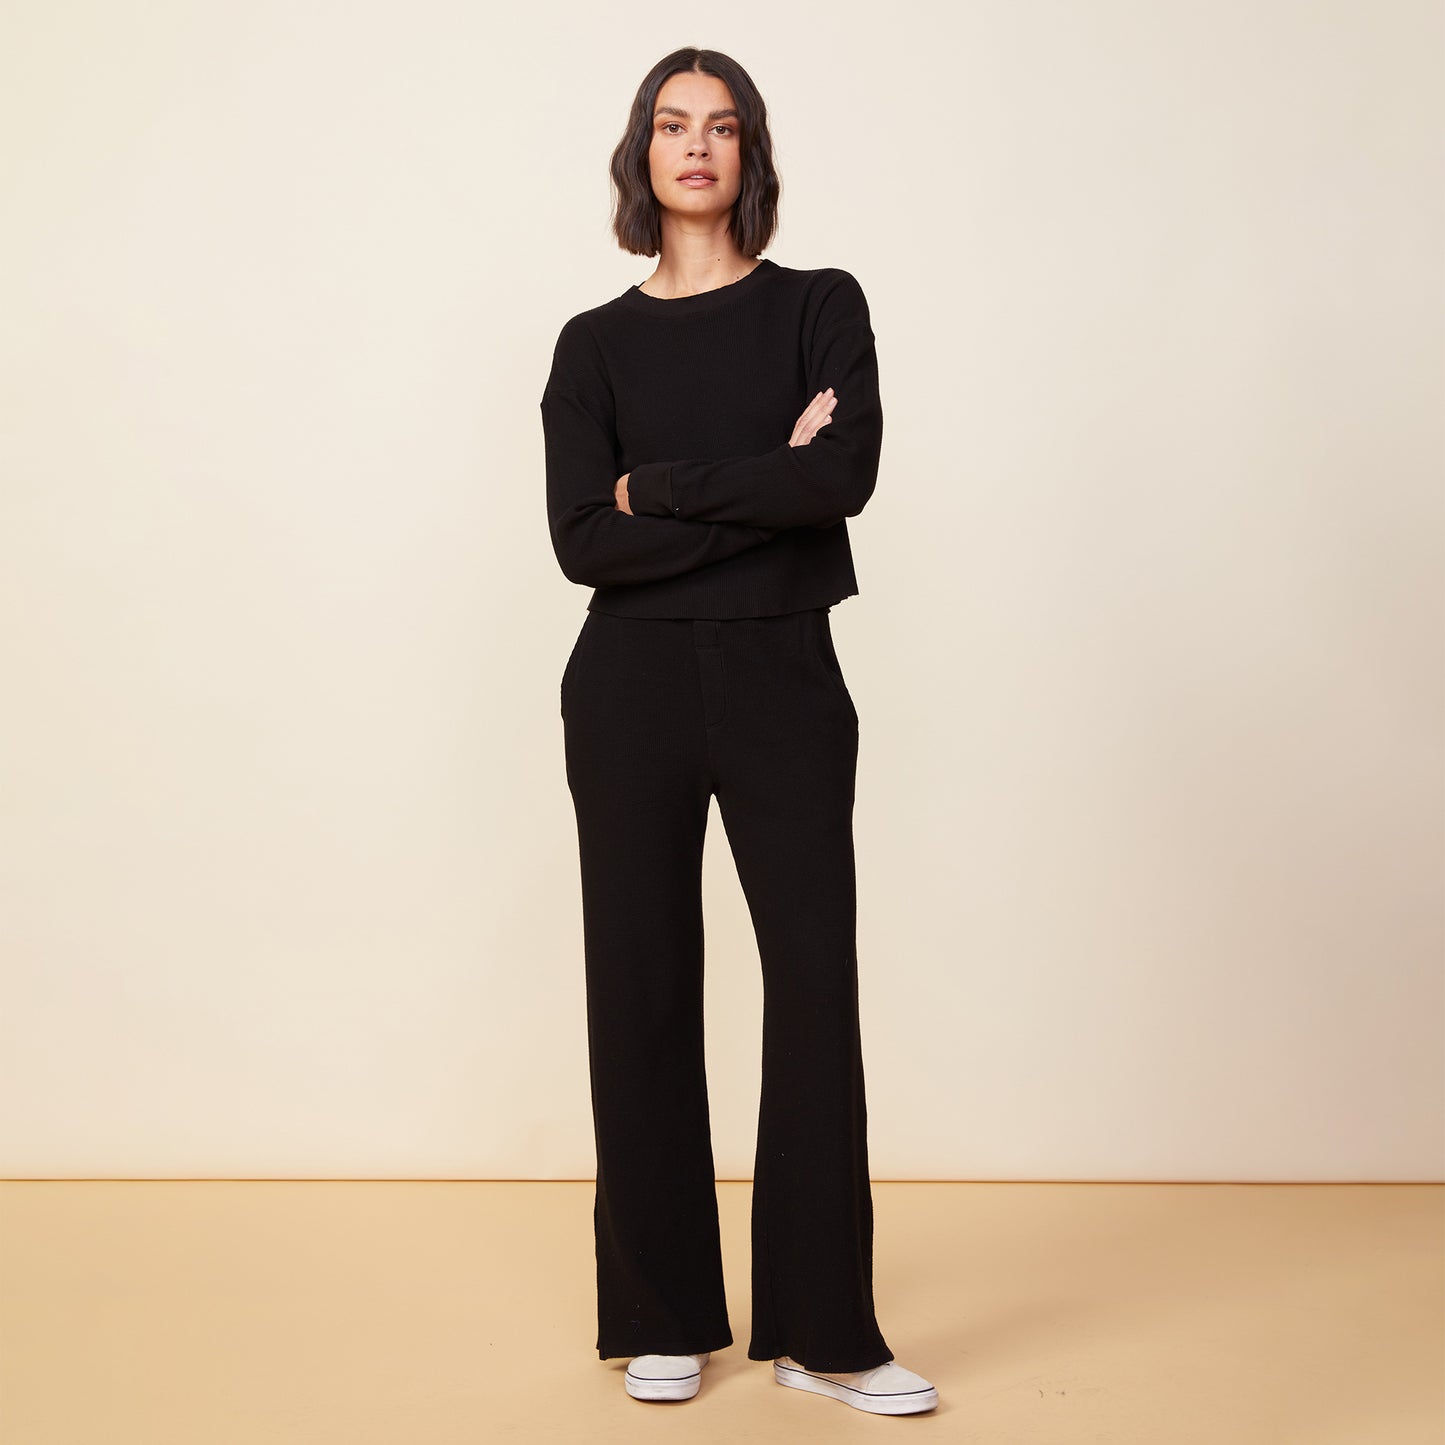 Front view of model wearing the thermal top in black.